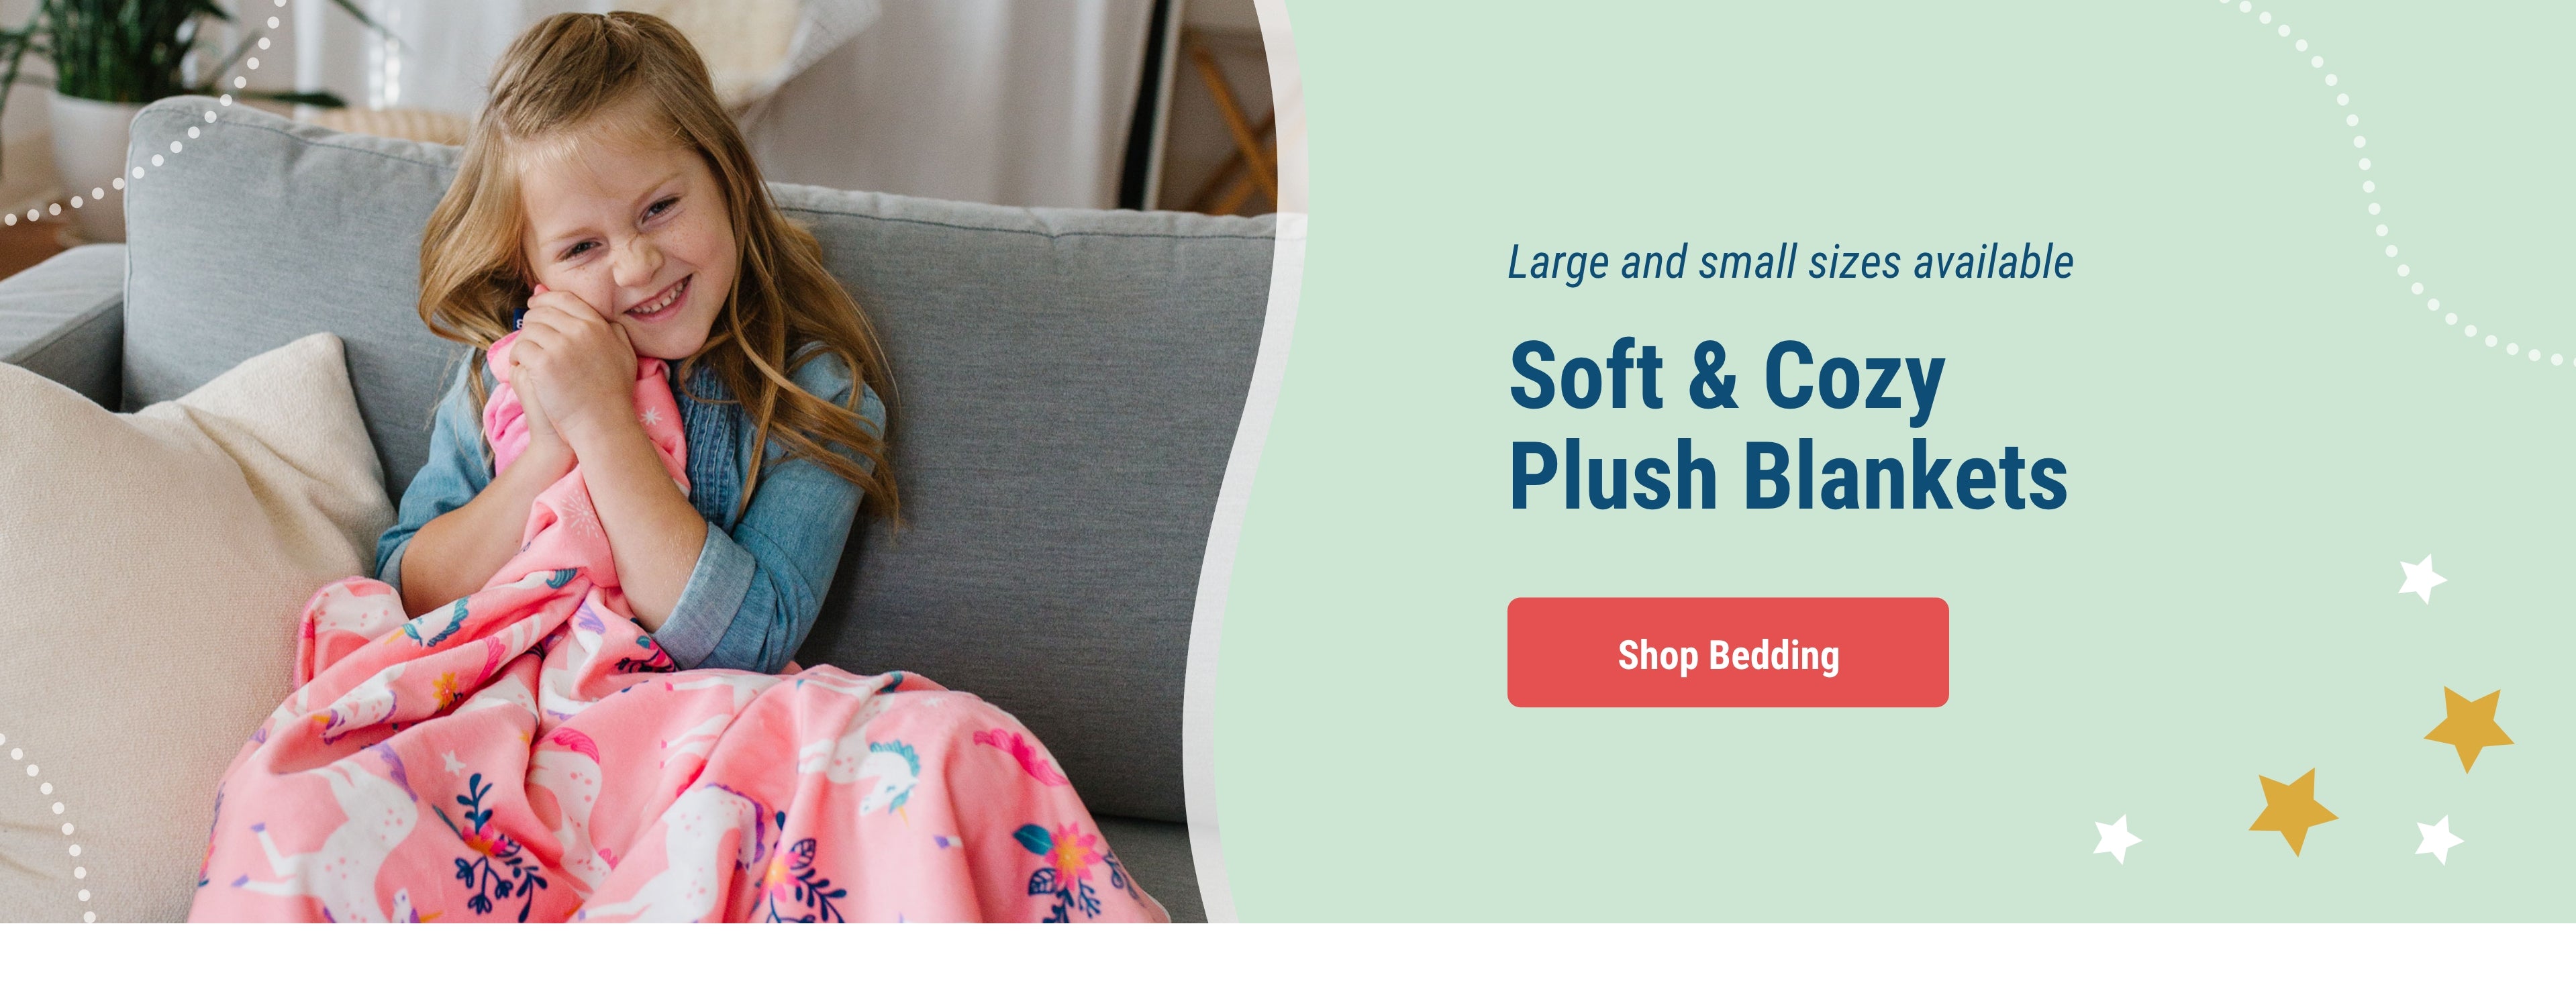 Large and small sizes available. Soft & Cozy Plush Blankets. Link to Shop Bedding. Image of girl holding Plush blanket with Magical Unicorns pattern